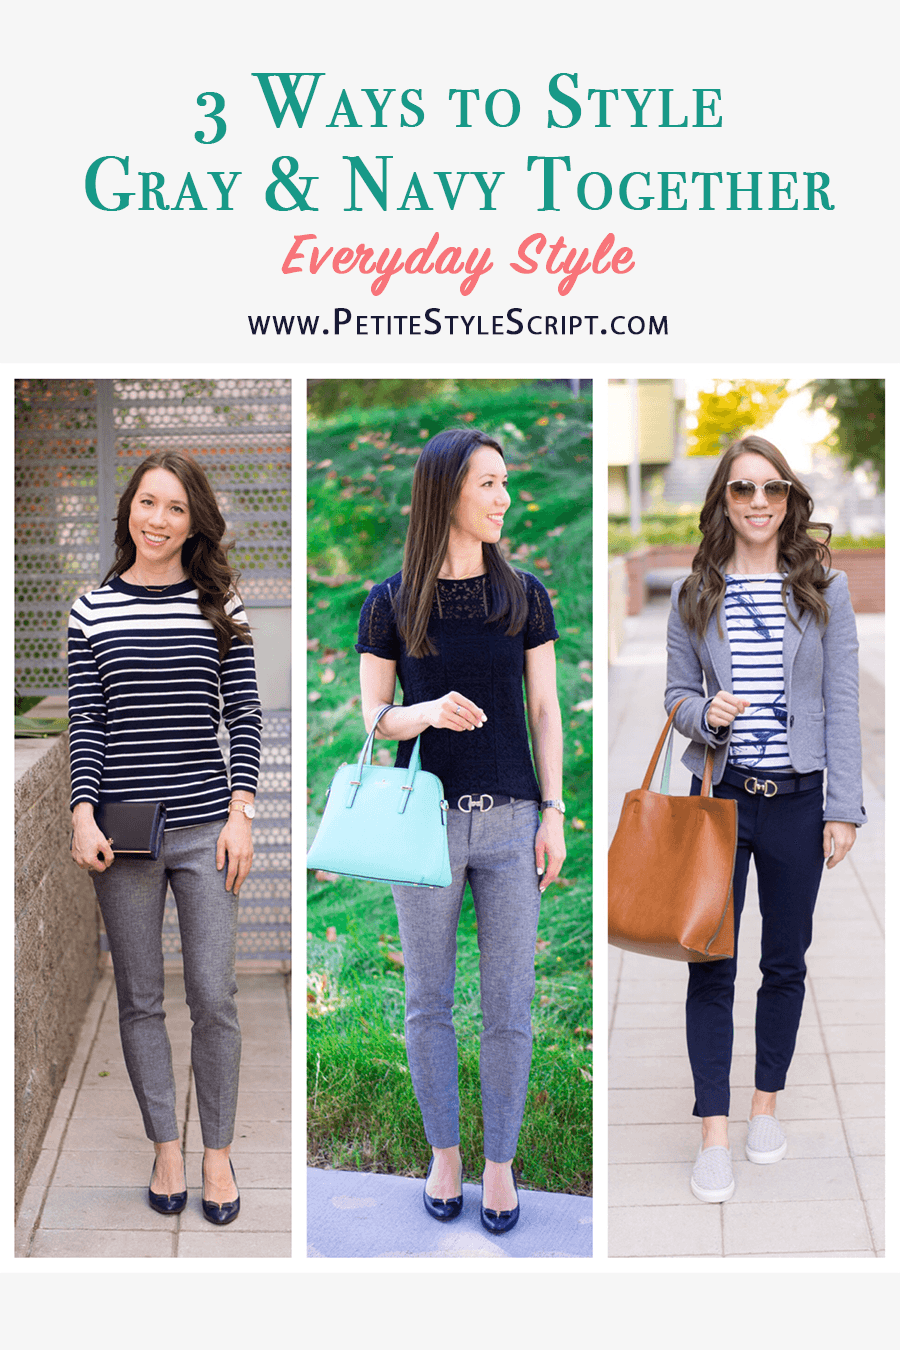 How to wear a gray bag